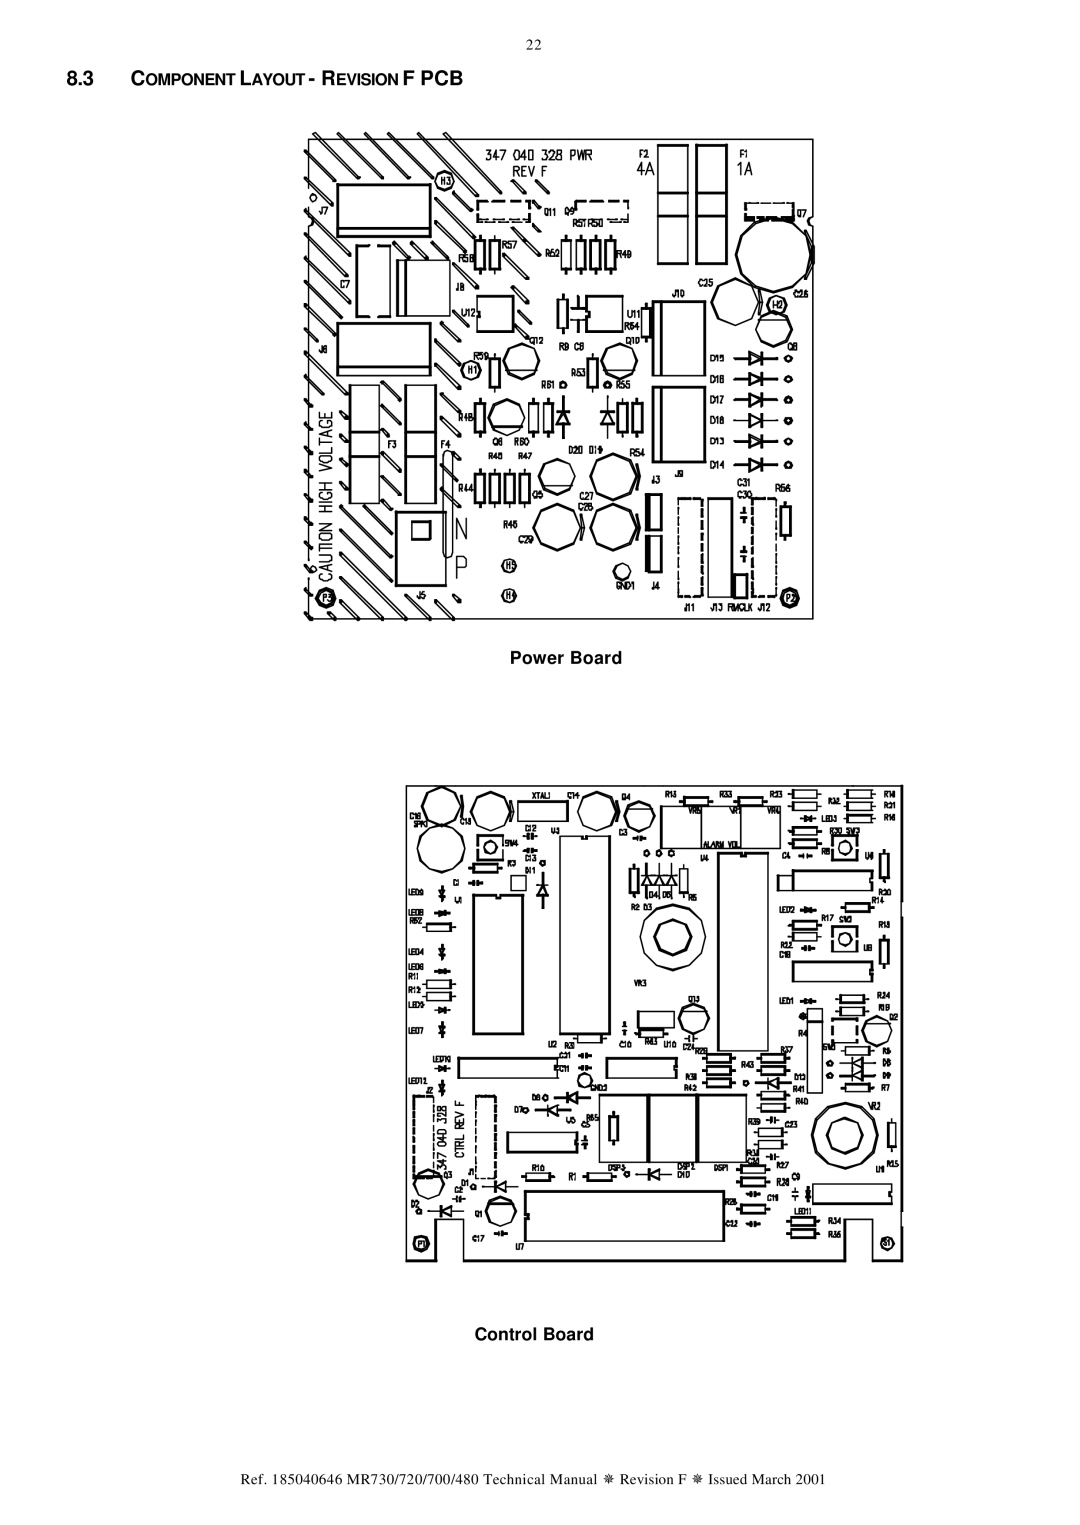 Fisher & Paykel MR720, MR730, MR480, MR700 technical manual Component Layout Revision F PCB 